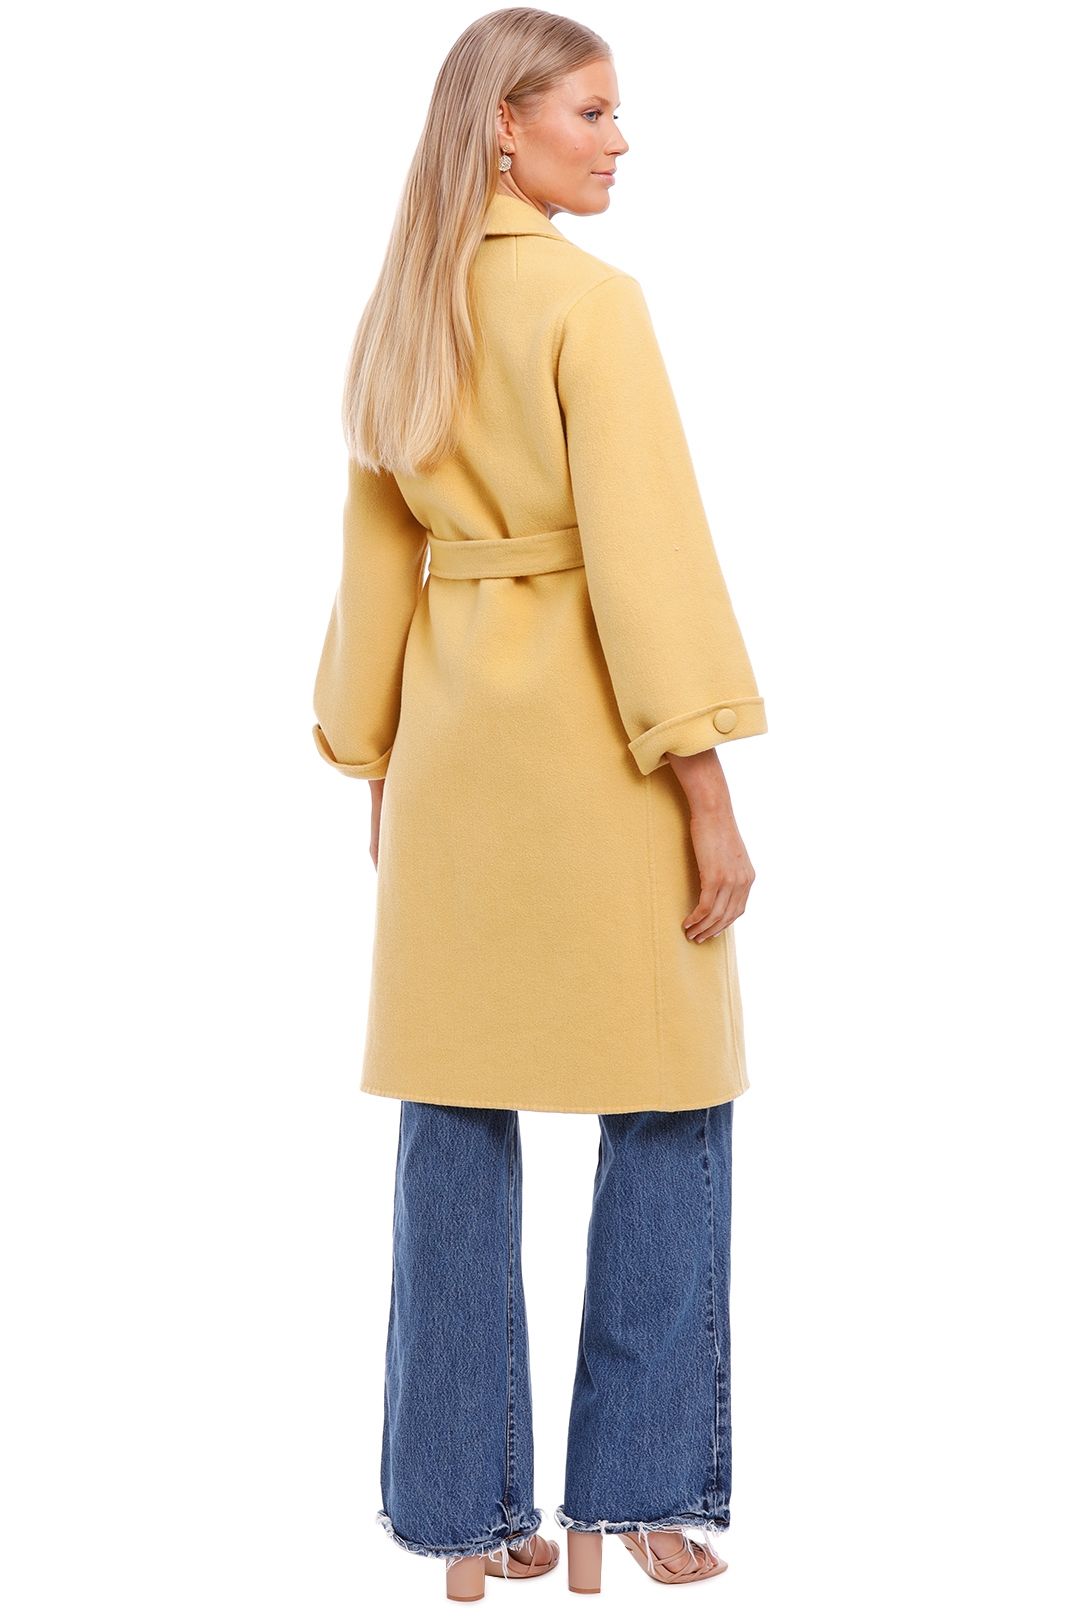 Belle and Bloom Stay Wild Coat Maize Belted